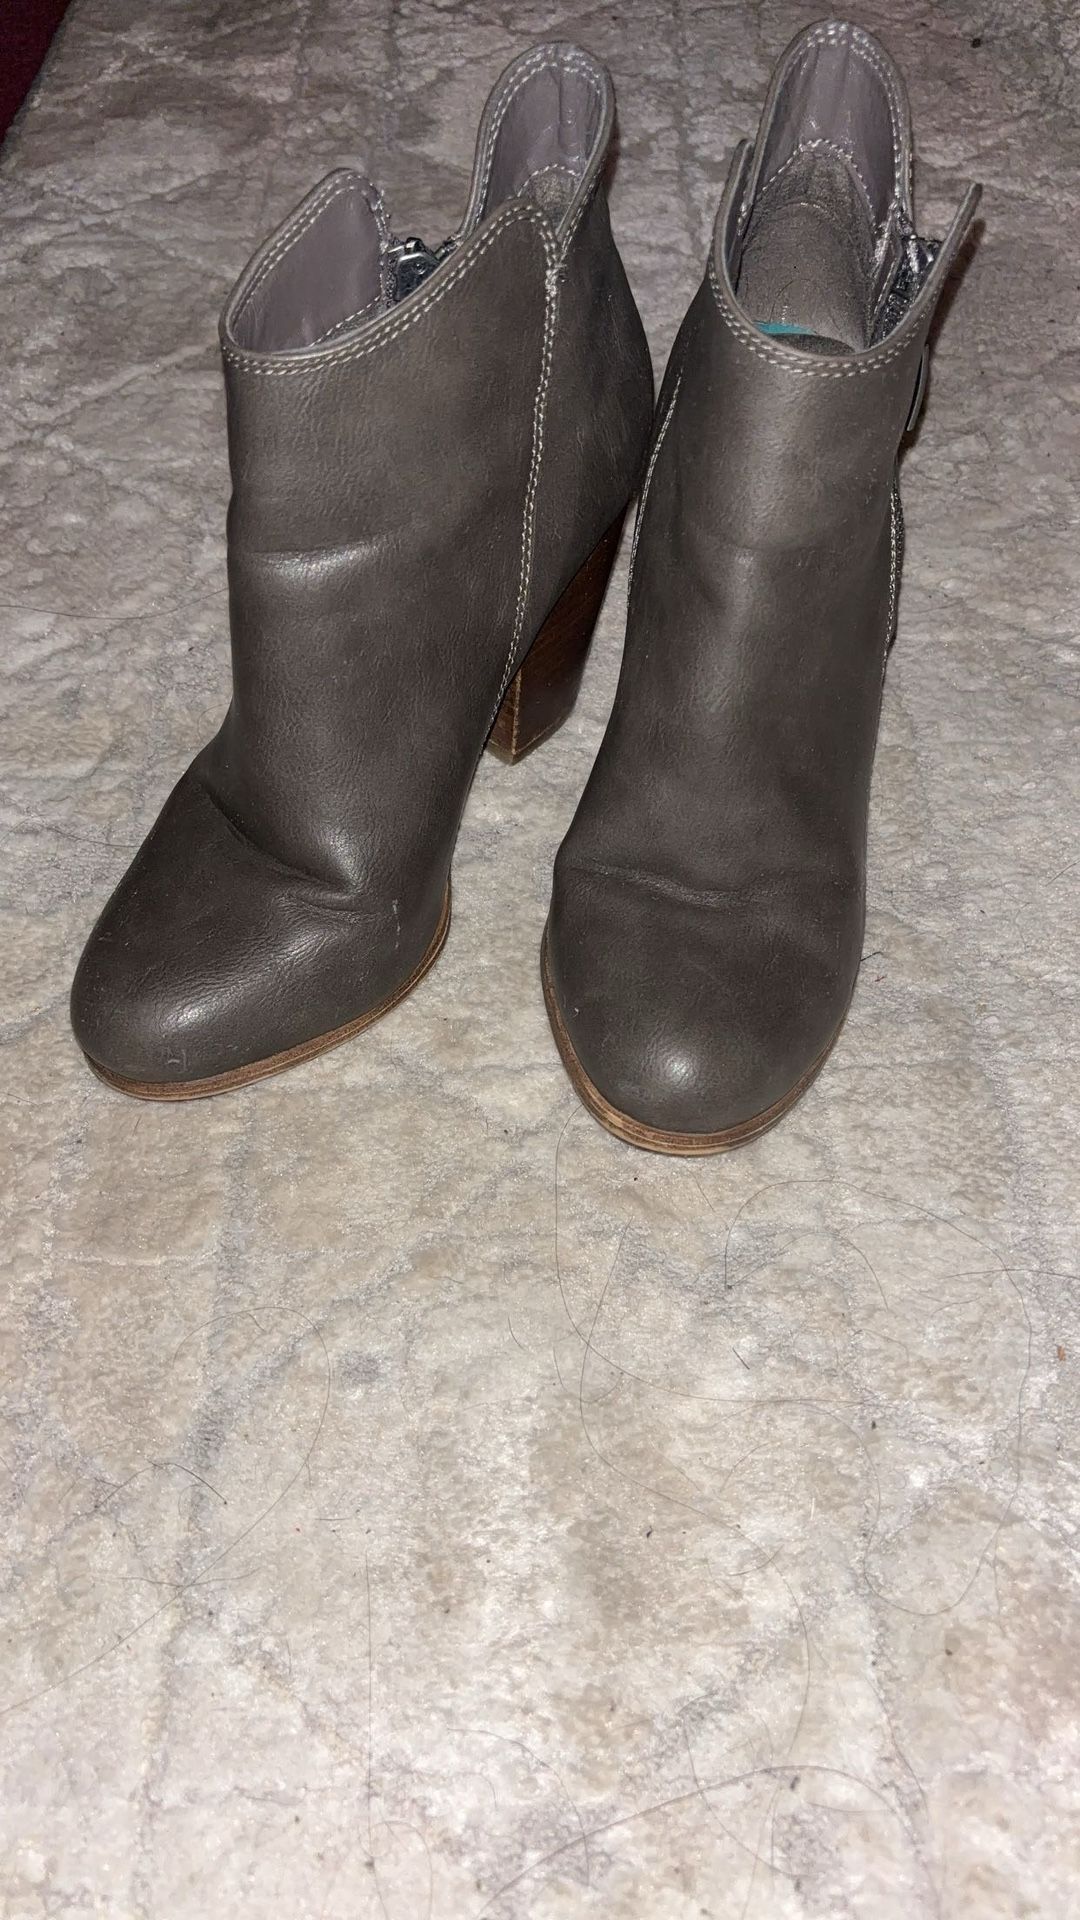 Michael Shannon Grey leather chunky brown heel boots size 6.5